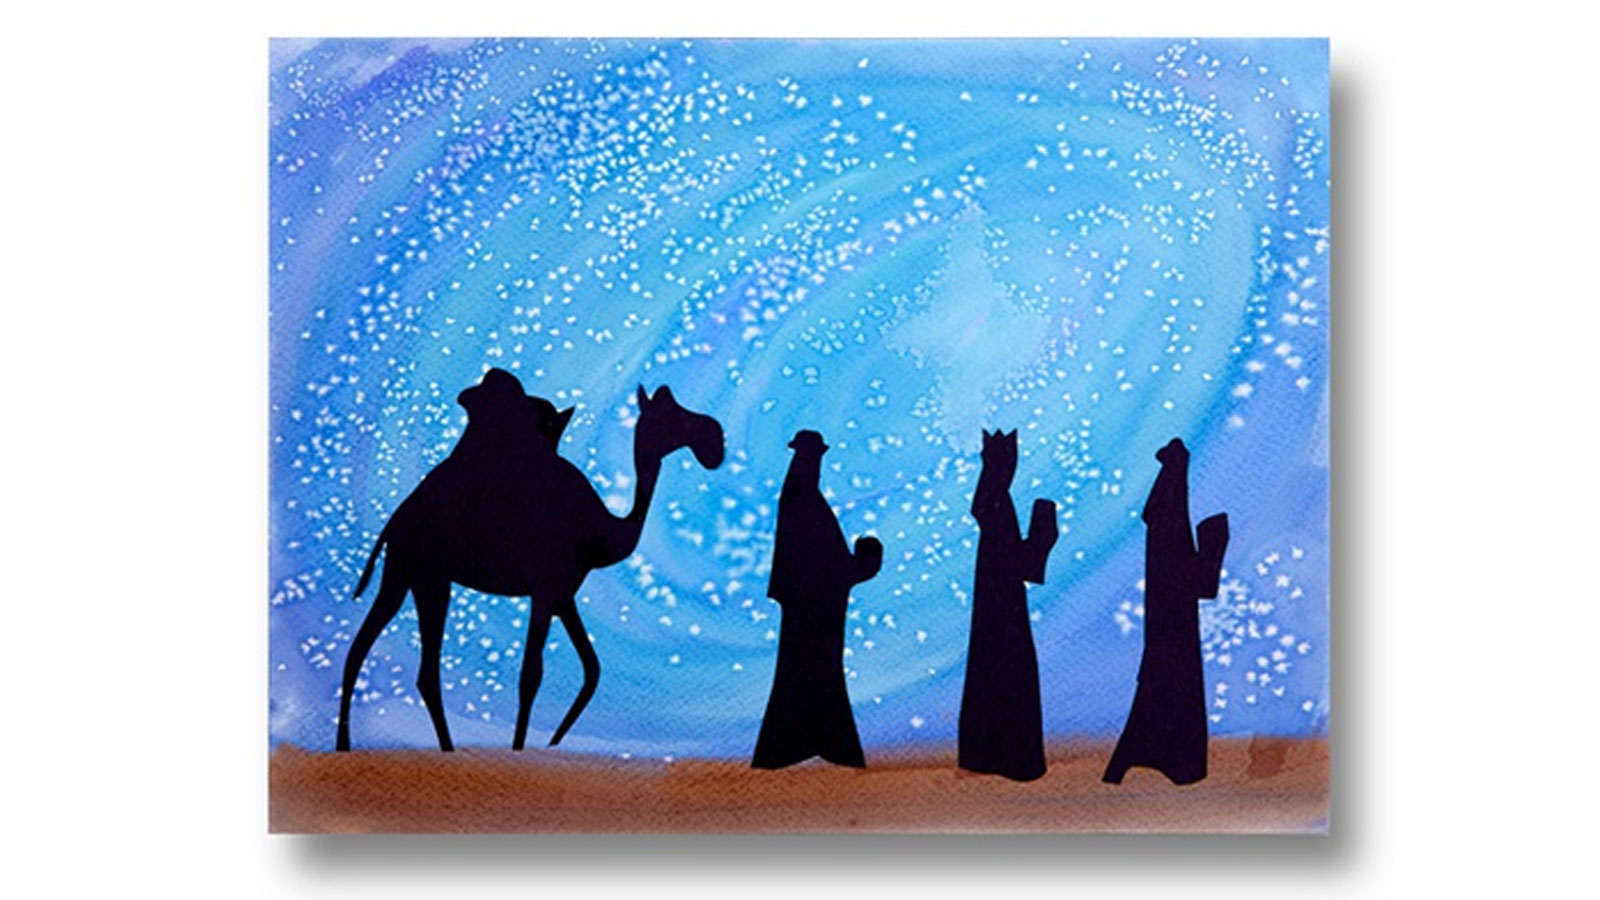 We three kings ciy diy crafts for kids and adults